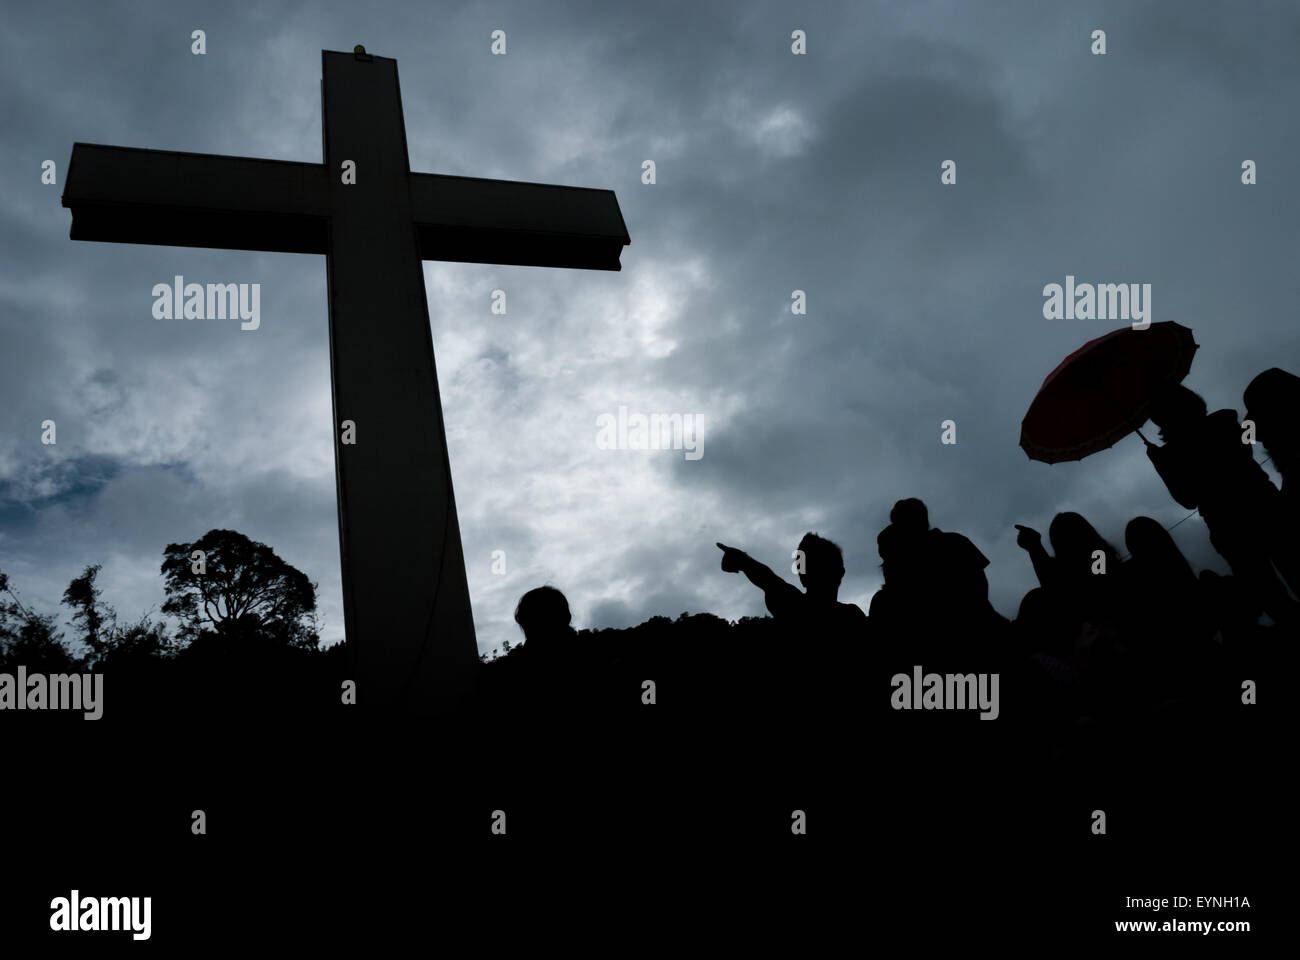 Silhouette of visitors and a tall Christian cross at Bukit Kasih (Hill of Love), a popular religious tourism destination in North Sulawesi, Indonesia. Stock Photo